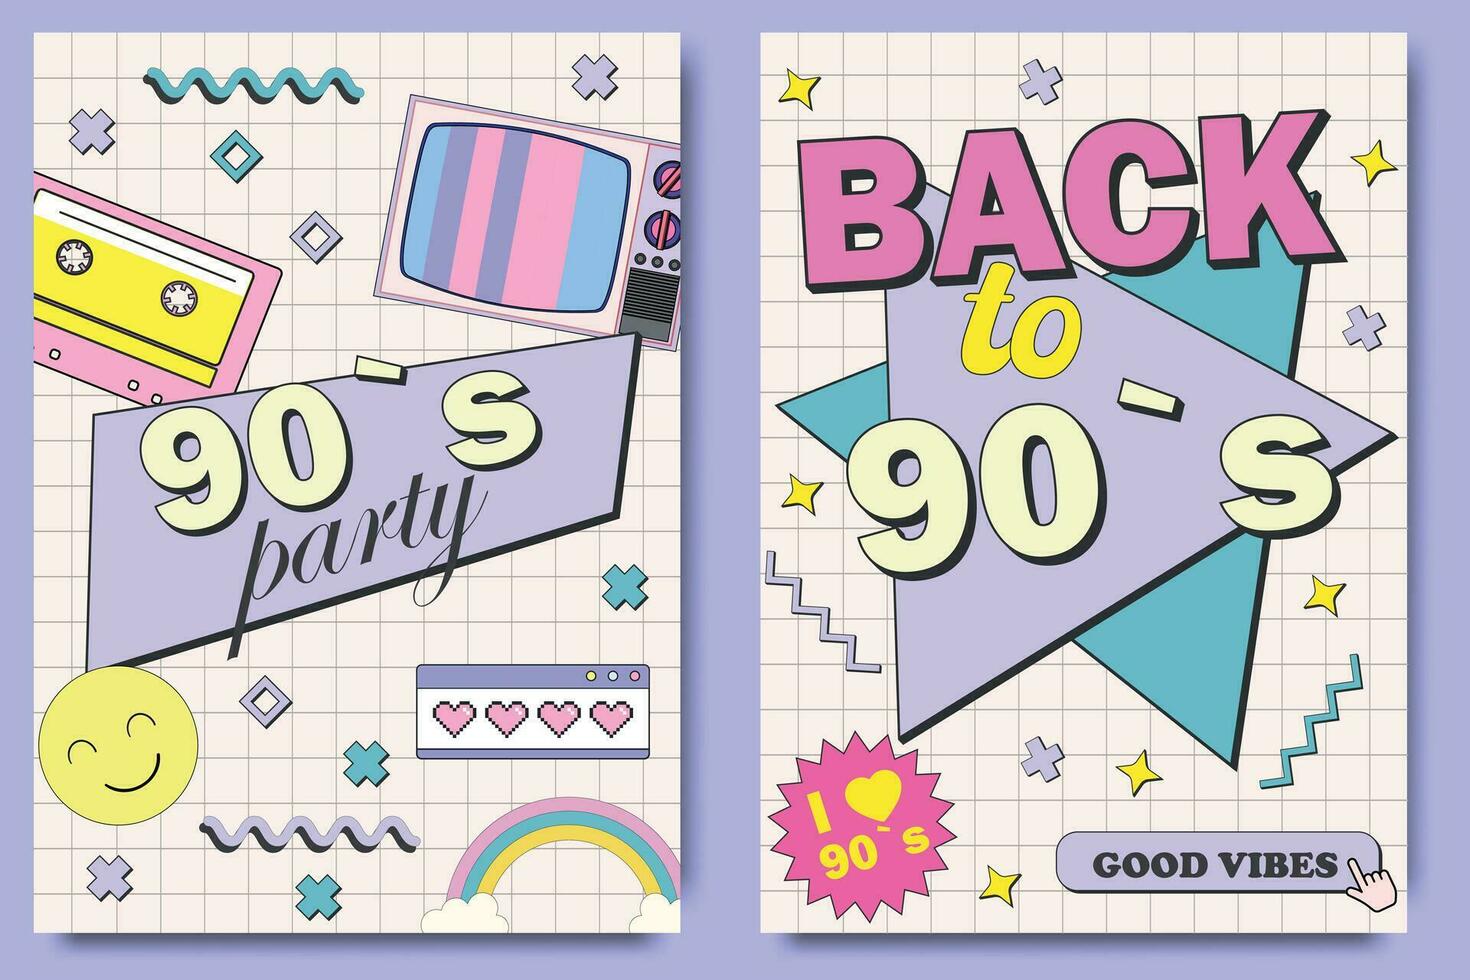 Retro party poster. 90's graphic design template. Music of the nineties, vintage cassette tape and 90s style. invitation card dancing party time advertisement poster background vector